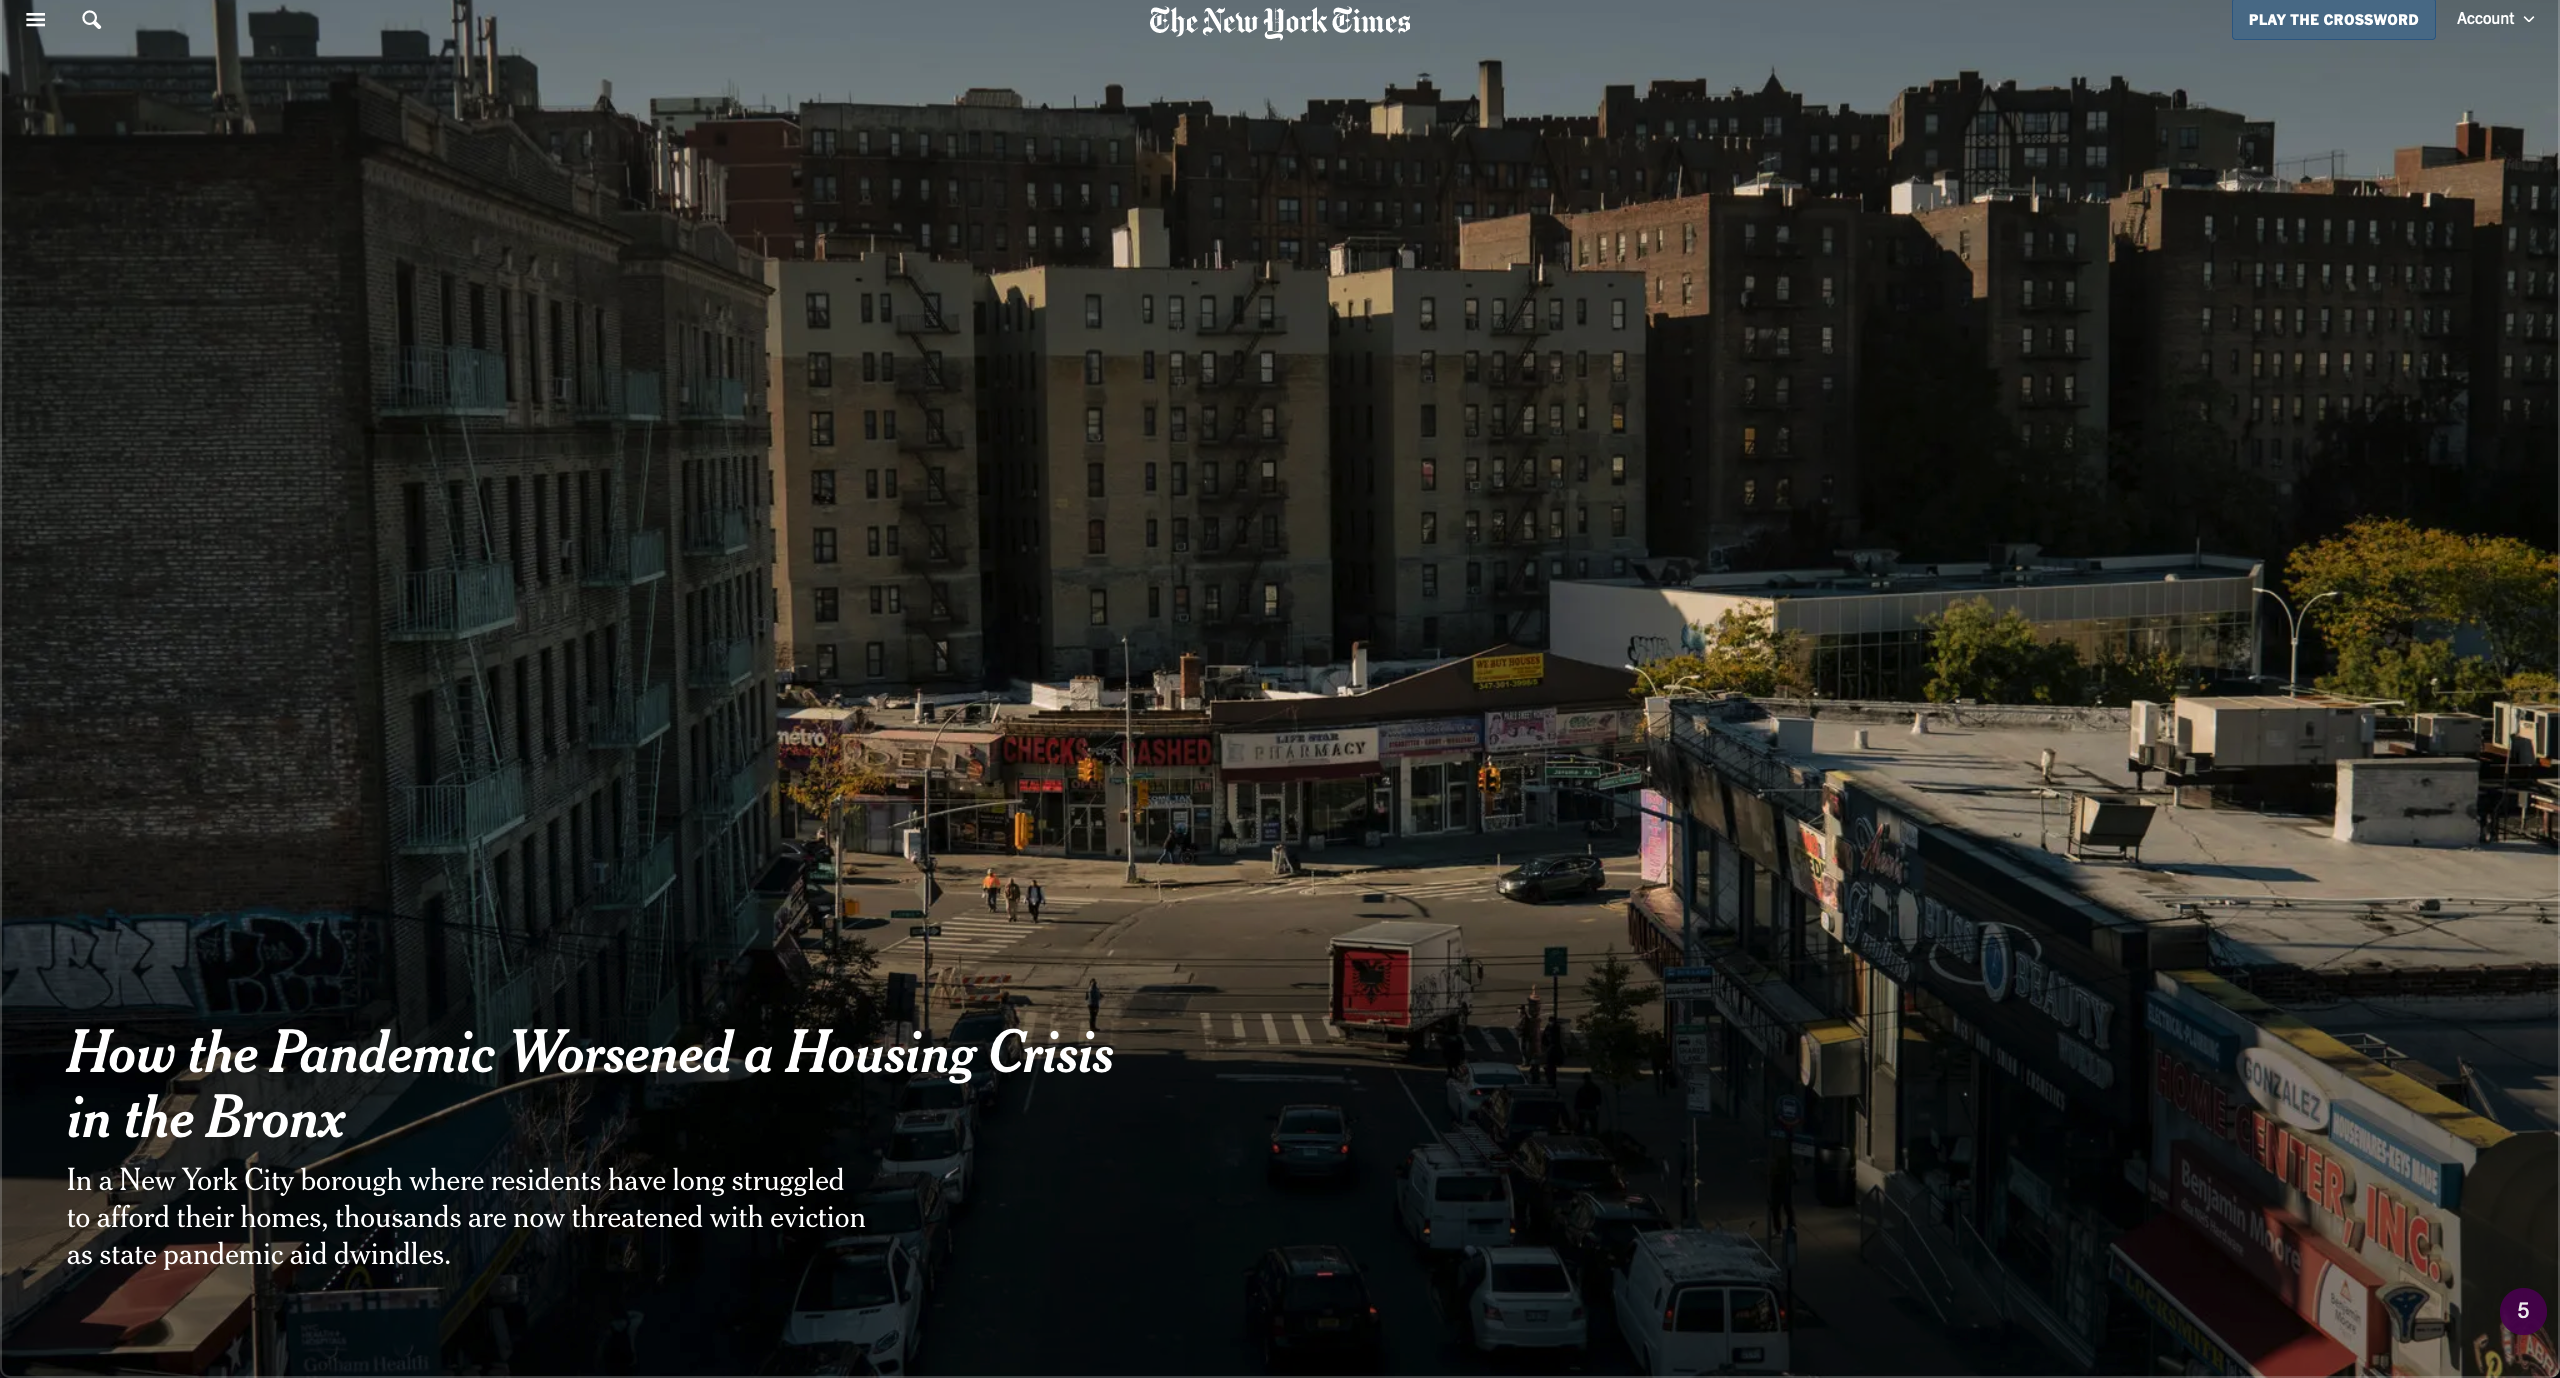 for The New York Times: How the Pandemic Worsened a Housing Crisis in the Bronx